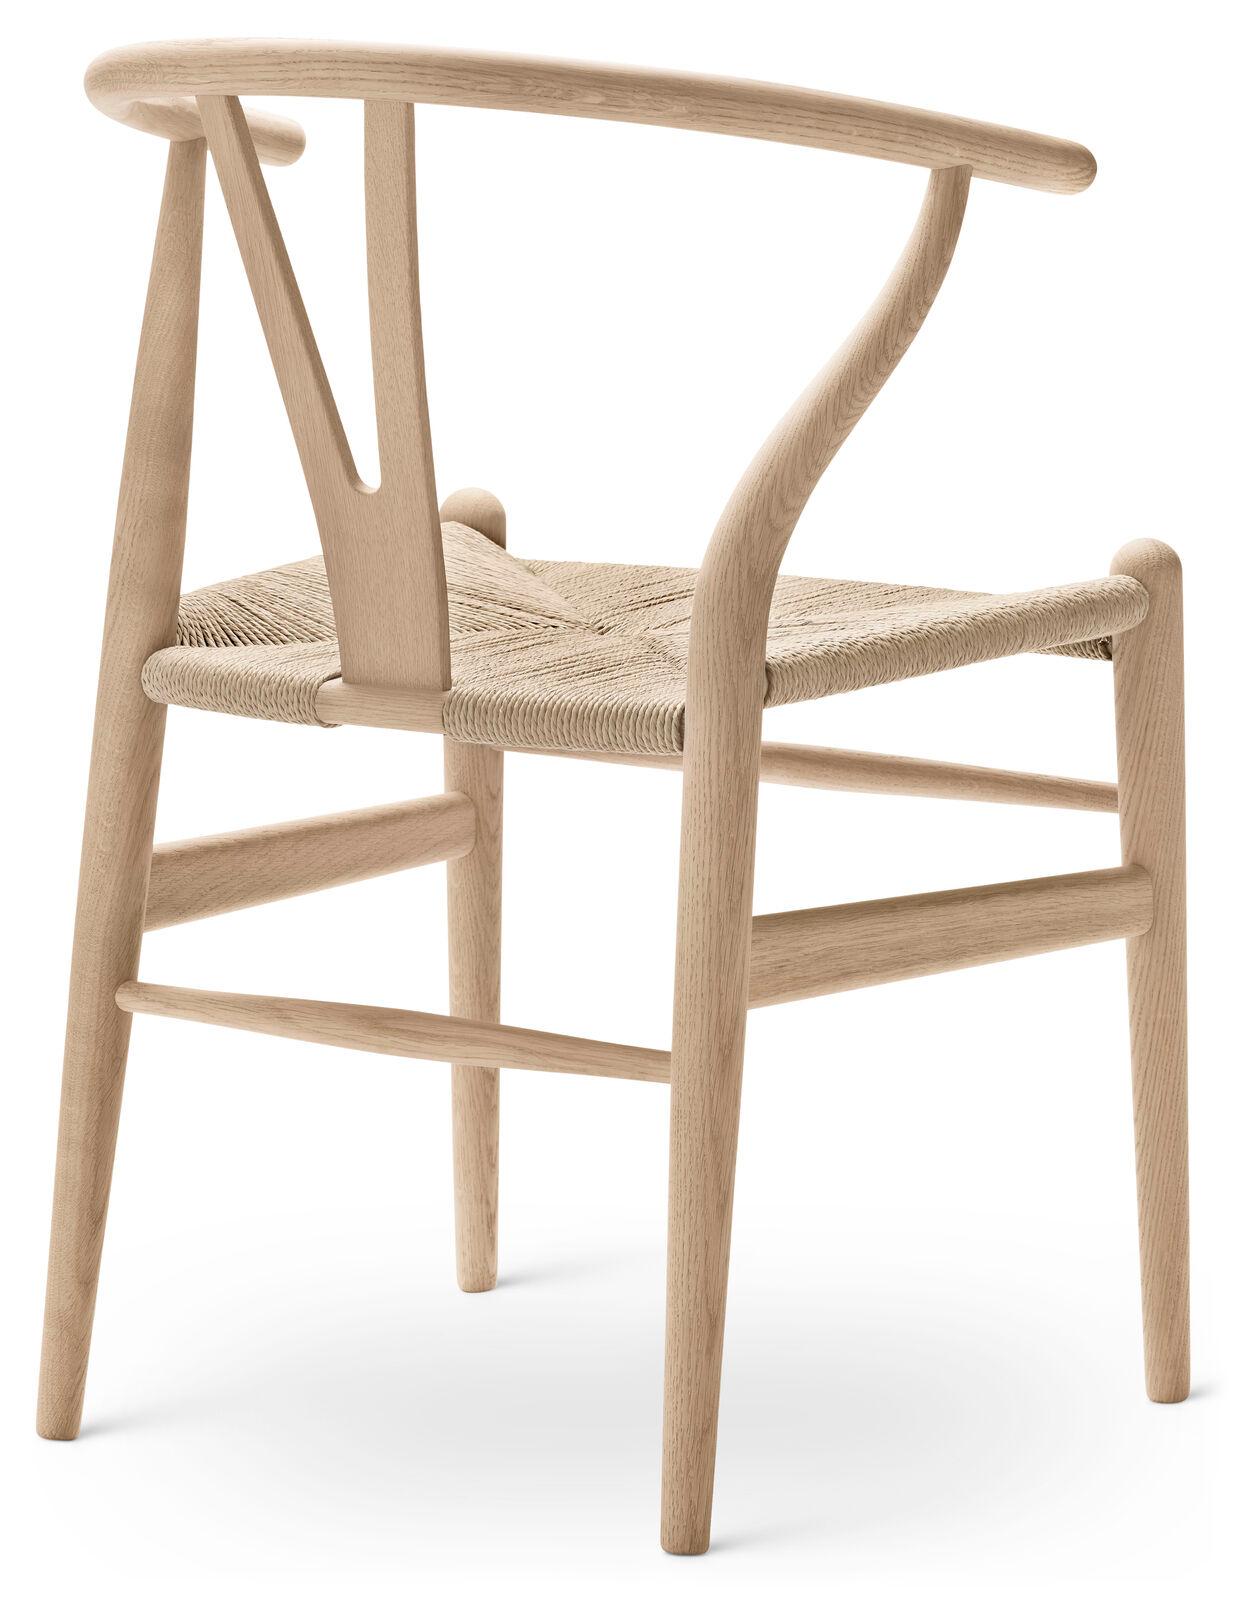 The very first model Hans J. Wegner designed exclusively for Carl Hansen & Søn in 1949, the CH24 or Wishbone Chair, has been in continuous production since its introduction in 1950.